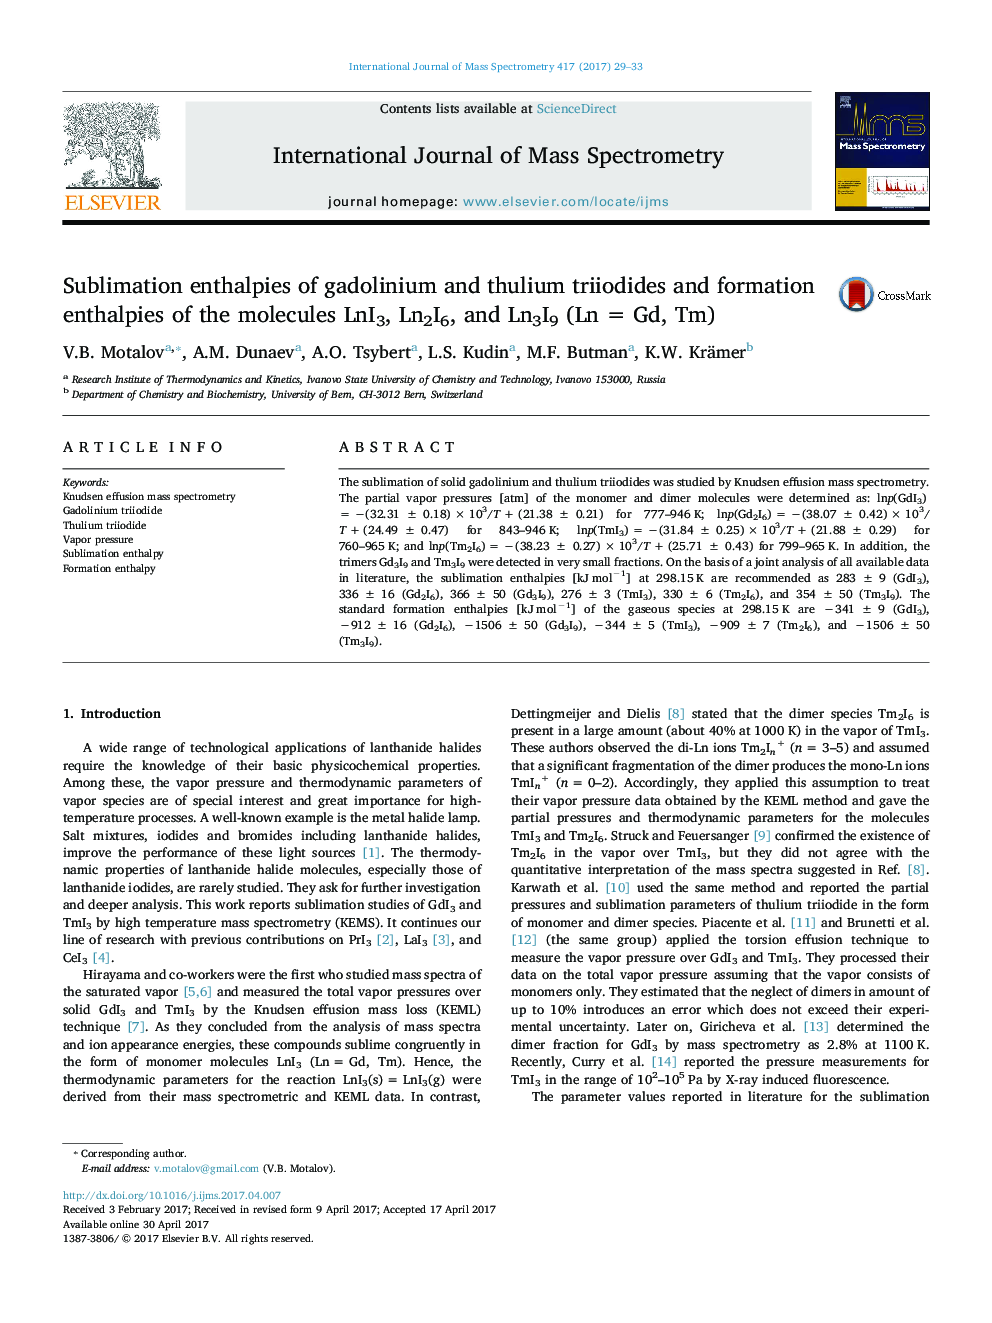 Sublimation enthalpies of gadolinium and thulium triiodides and formation enthalpies of the molecules LnI3, Ln2I6, and Ln3I9 (Ln = Gd, Tm)